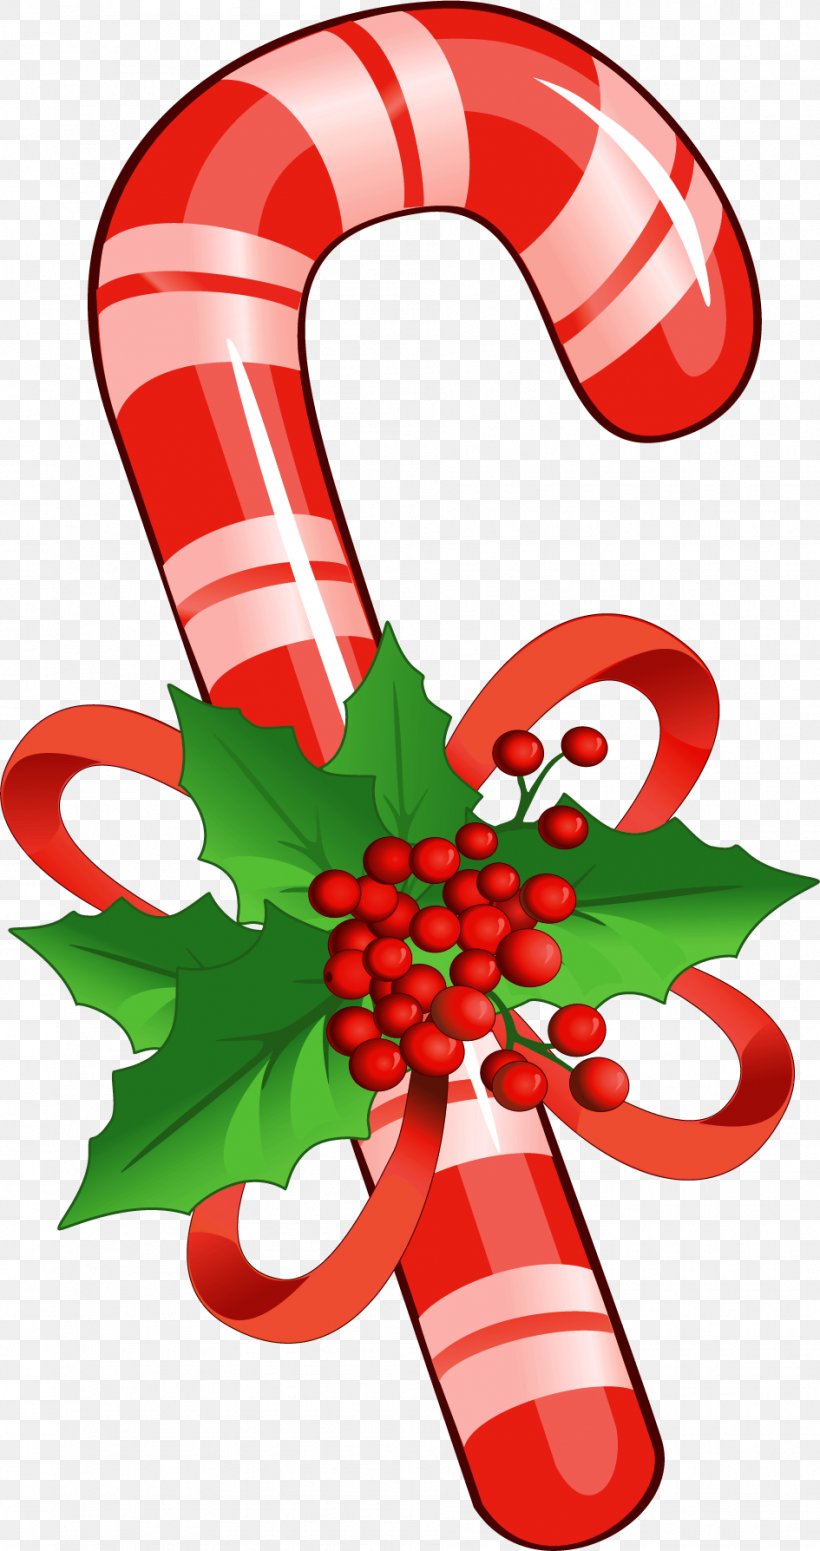 Candy Cane Lollipop Christmas Clip Art, PNG, 945x1788px, Candy Cane, Candy, Christmas, Christmas Decoration, Christmas Ornament Download Free